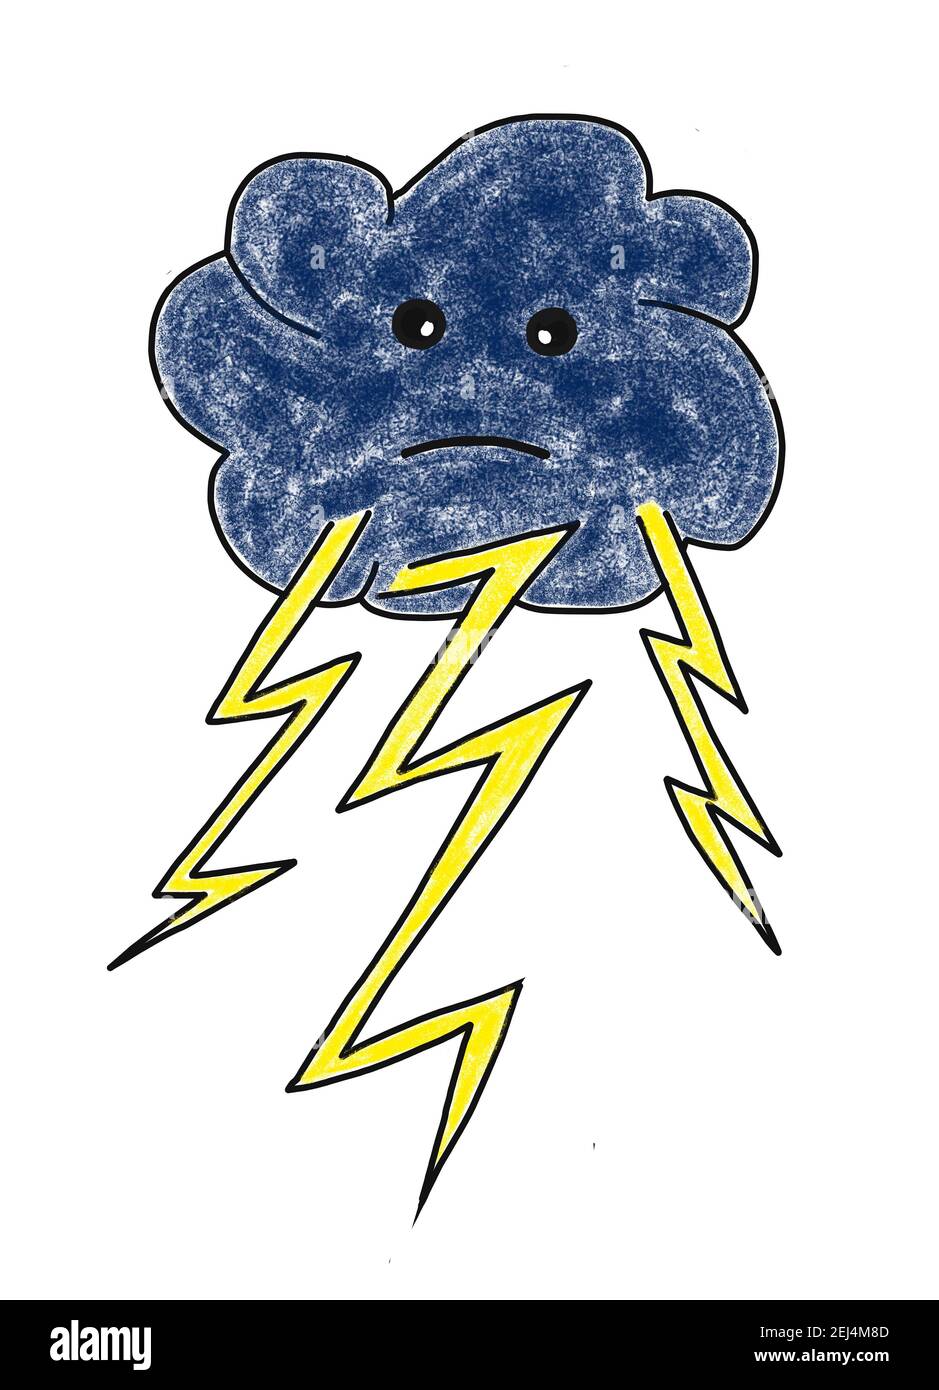 https://c8.alamy.com/comp/2EJ4M8D/naive-illustration-child-drawing-gloomy-storm-clouds-with-lightnings-2EJ4M8D.jpg